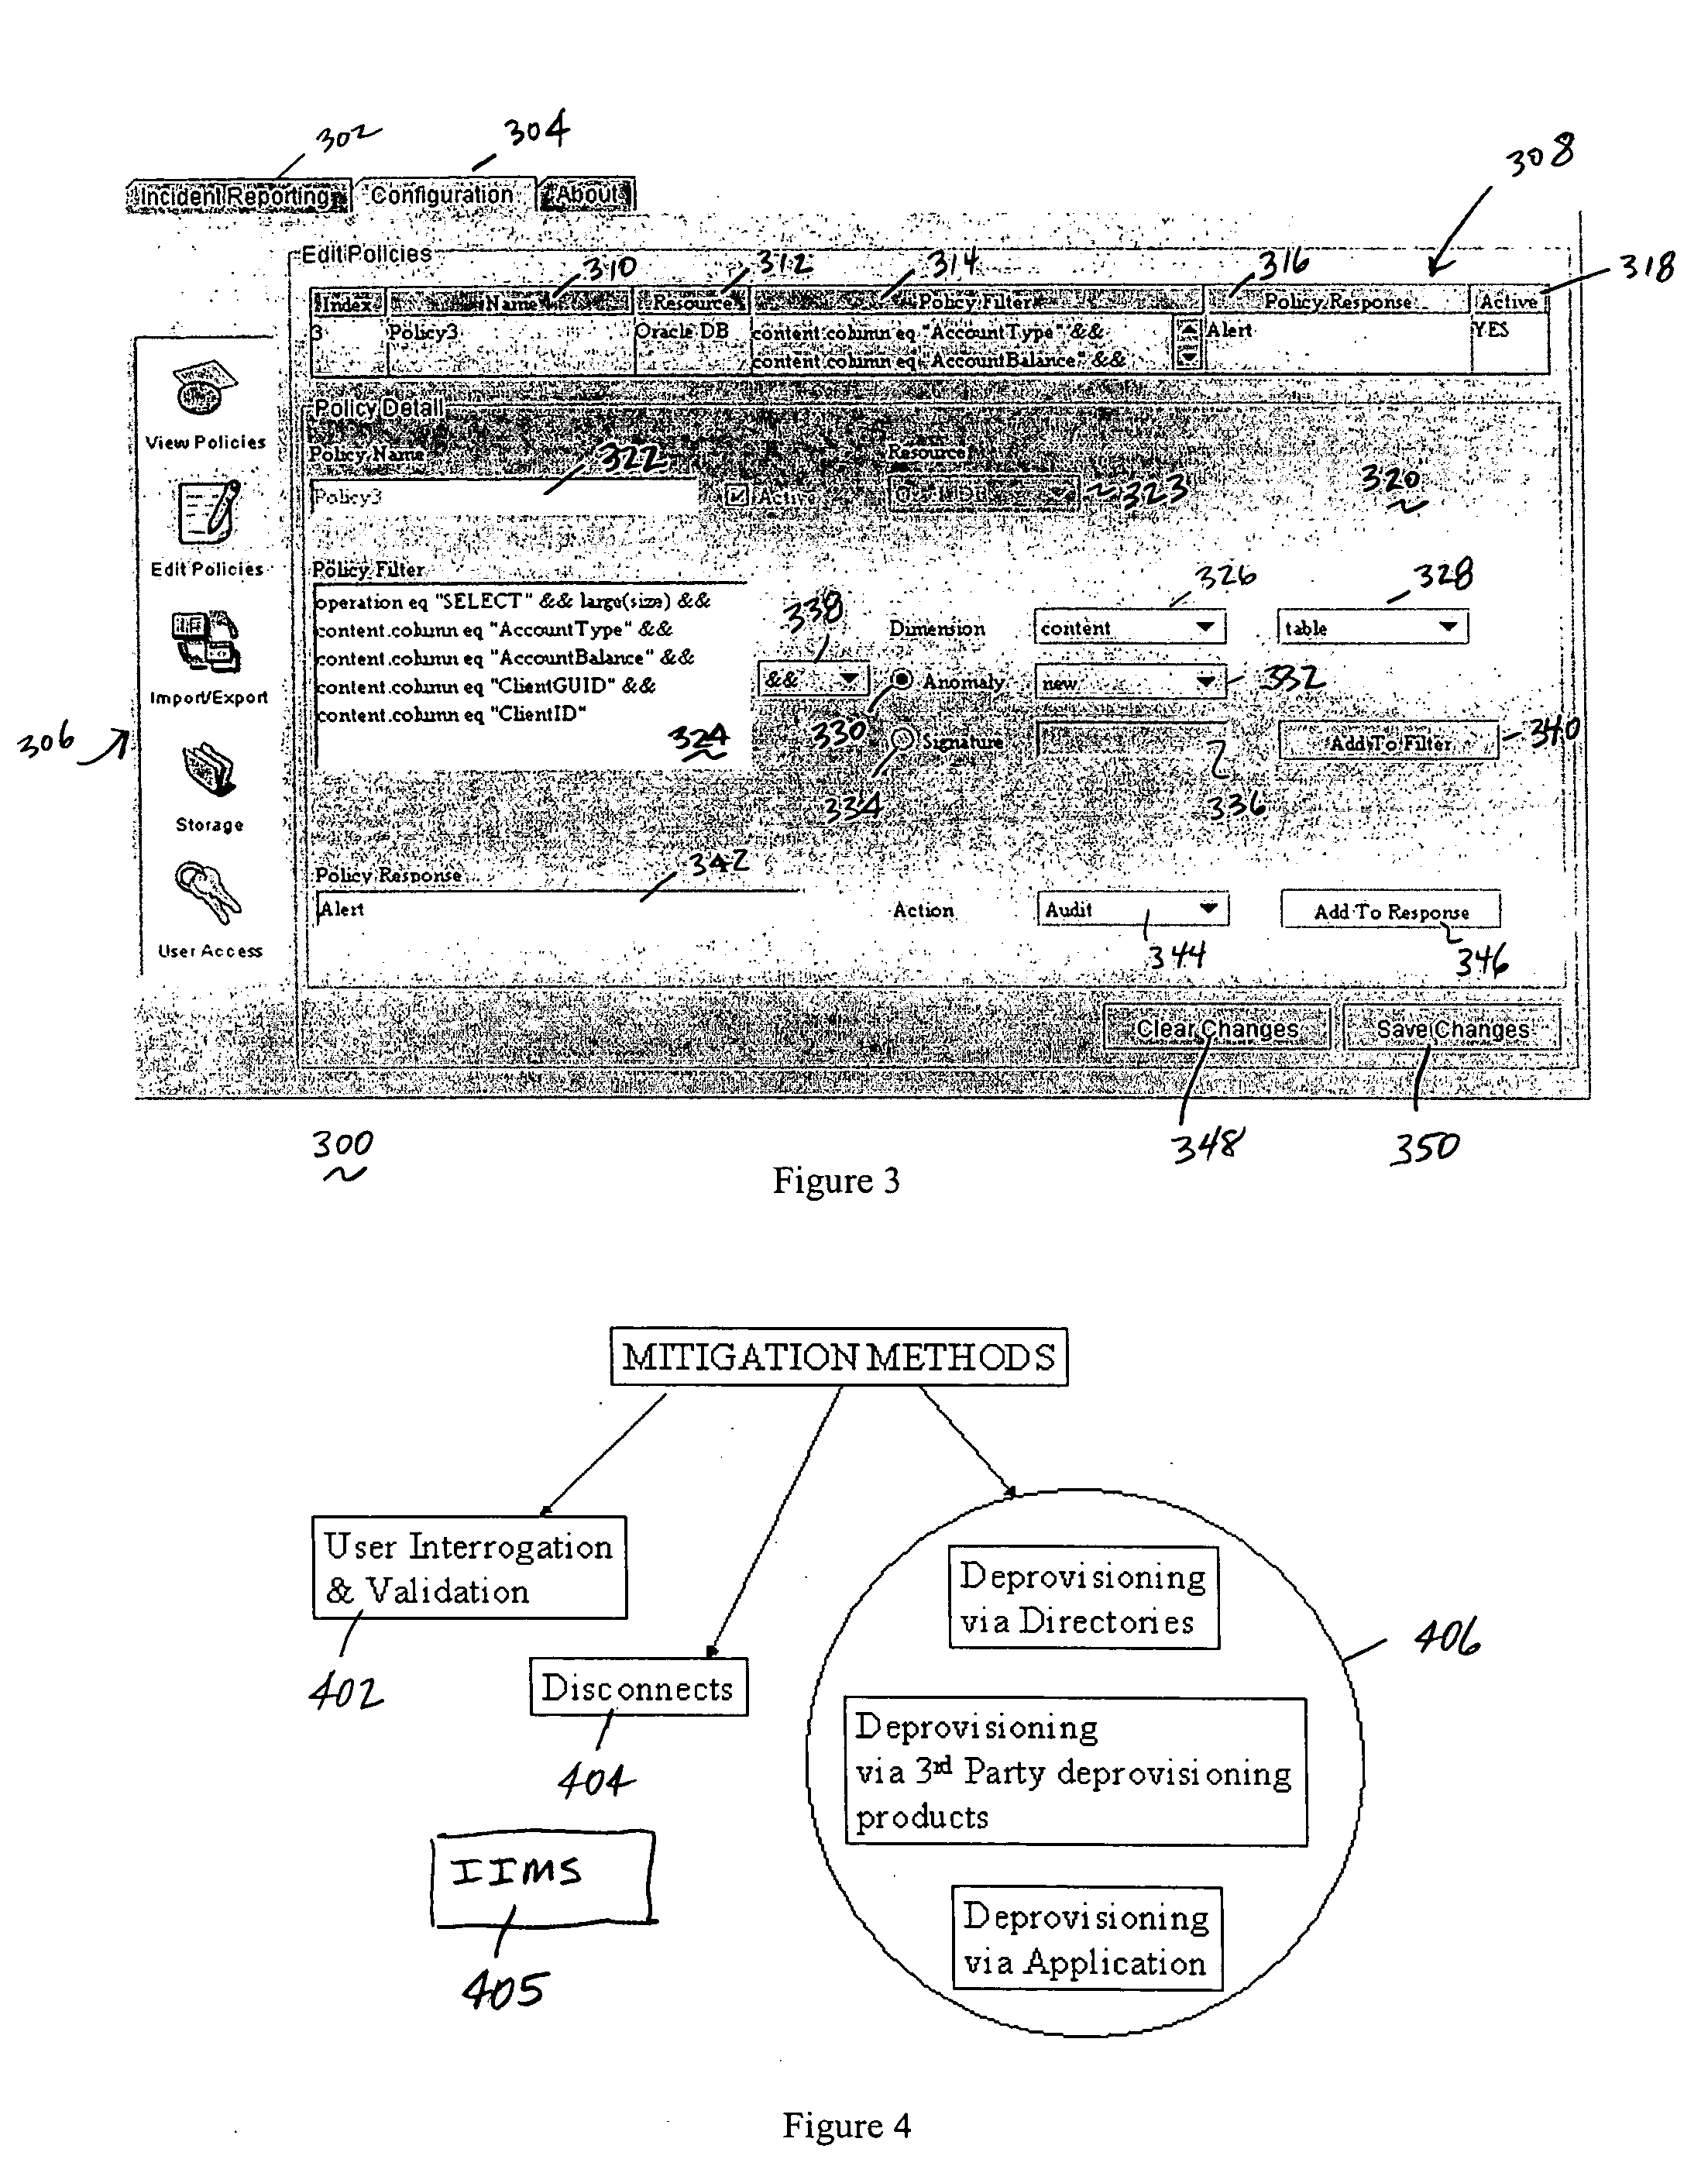 Method of and system for enterprise information asset protection through insider attack specification, monitoring and mitigation